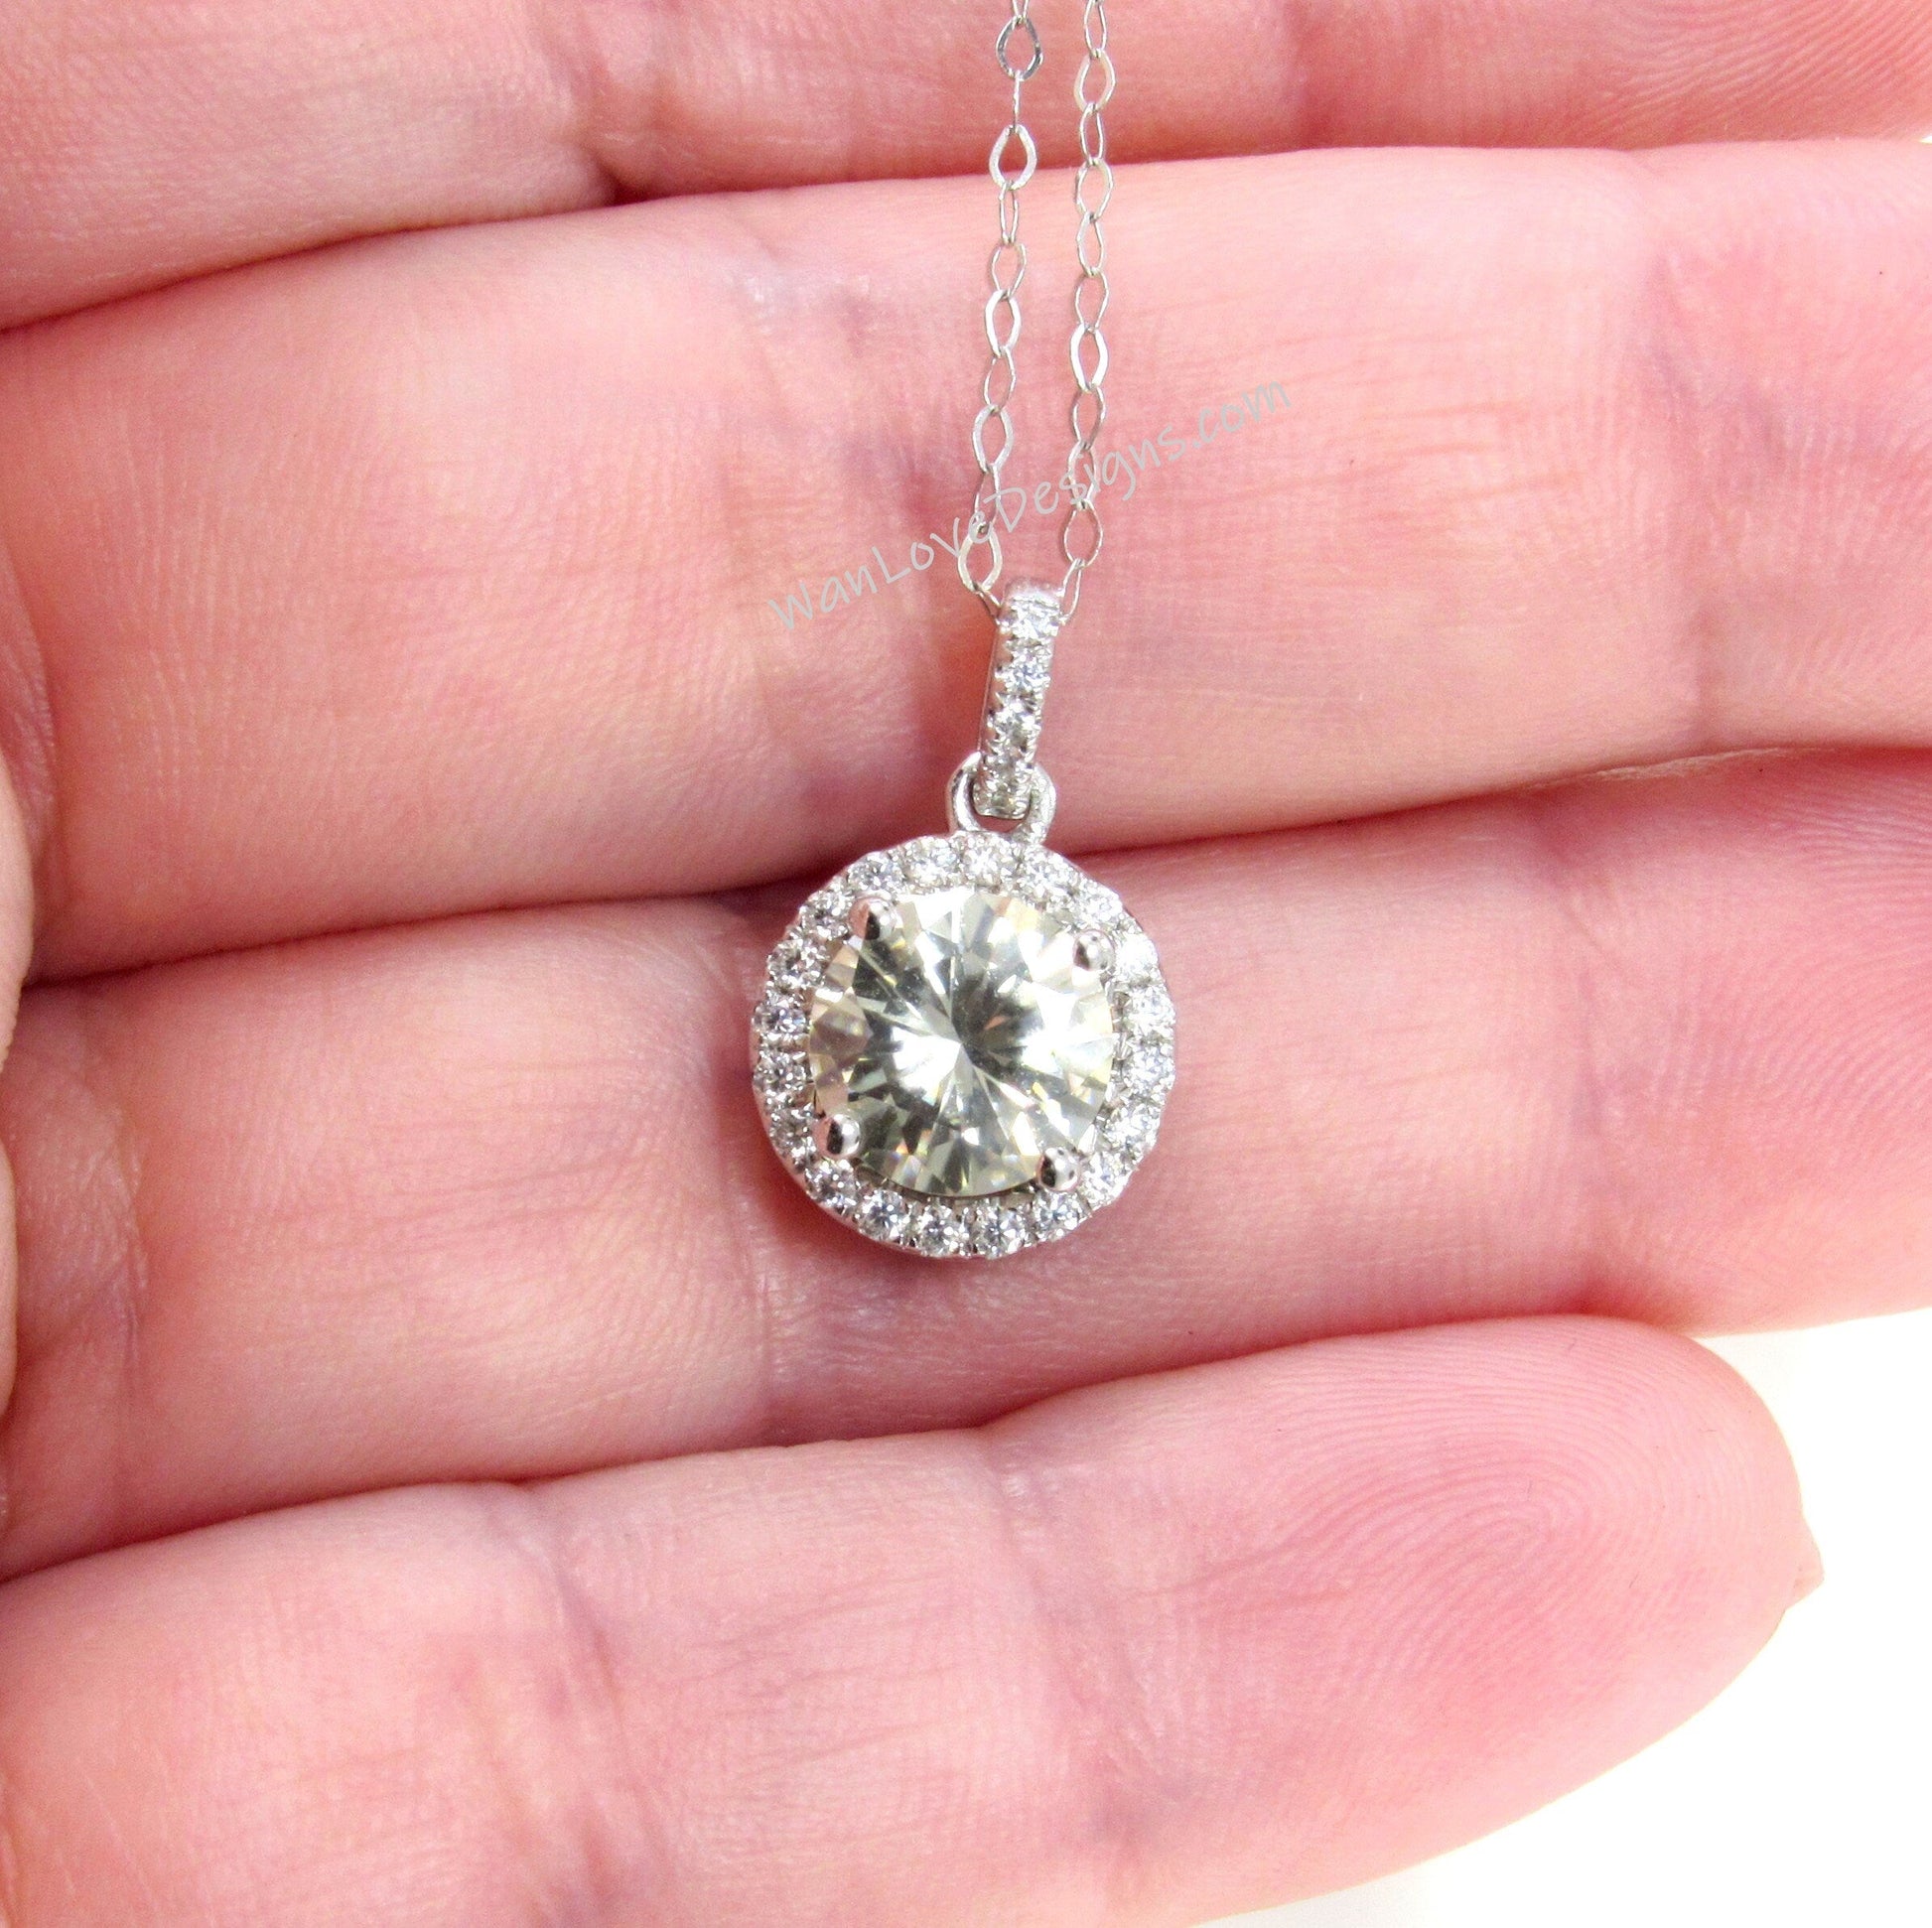 Champagne Moissanite Halo Necklace, Round cut Halo Necklace, White Gold Moissanite Halo Charm, Birthday Gift, Gift For Her, Ready-To-Ship Wan Love Designs